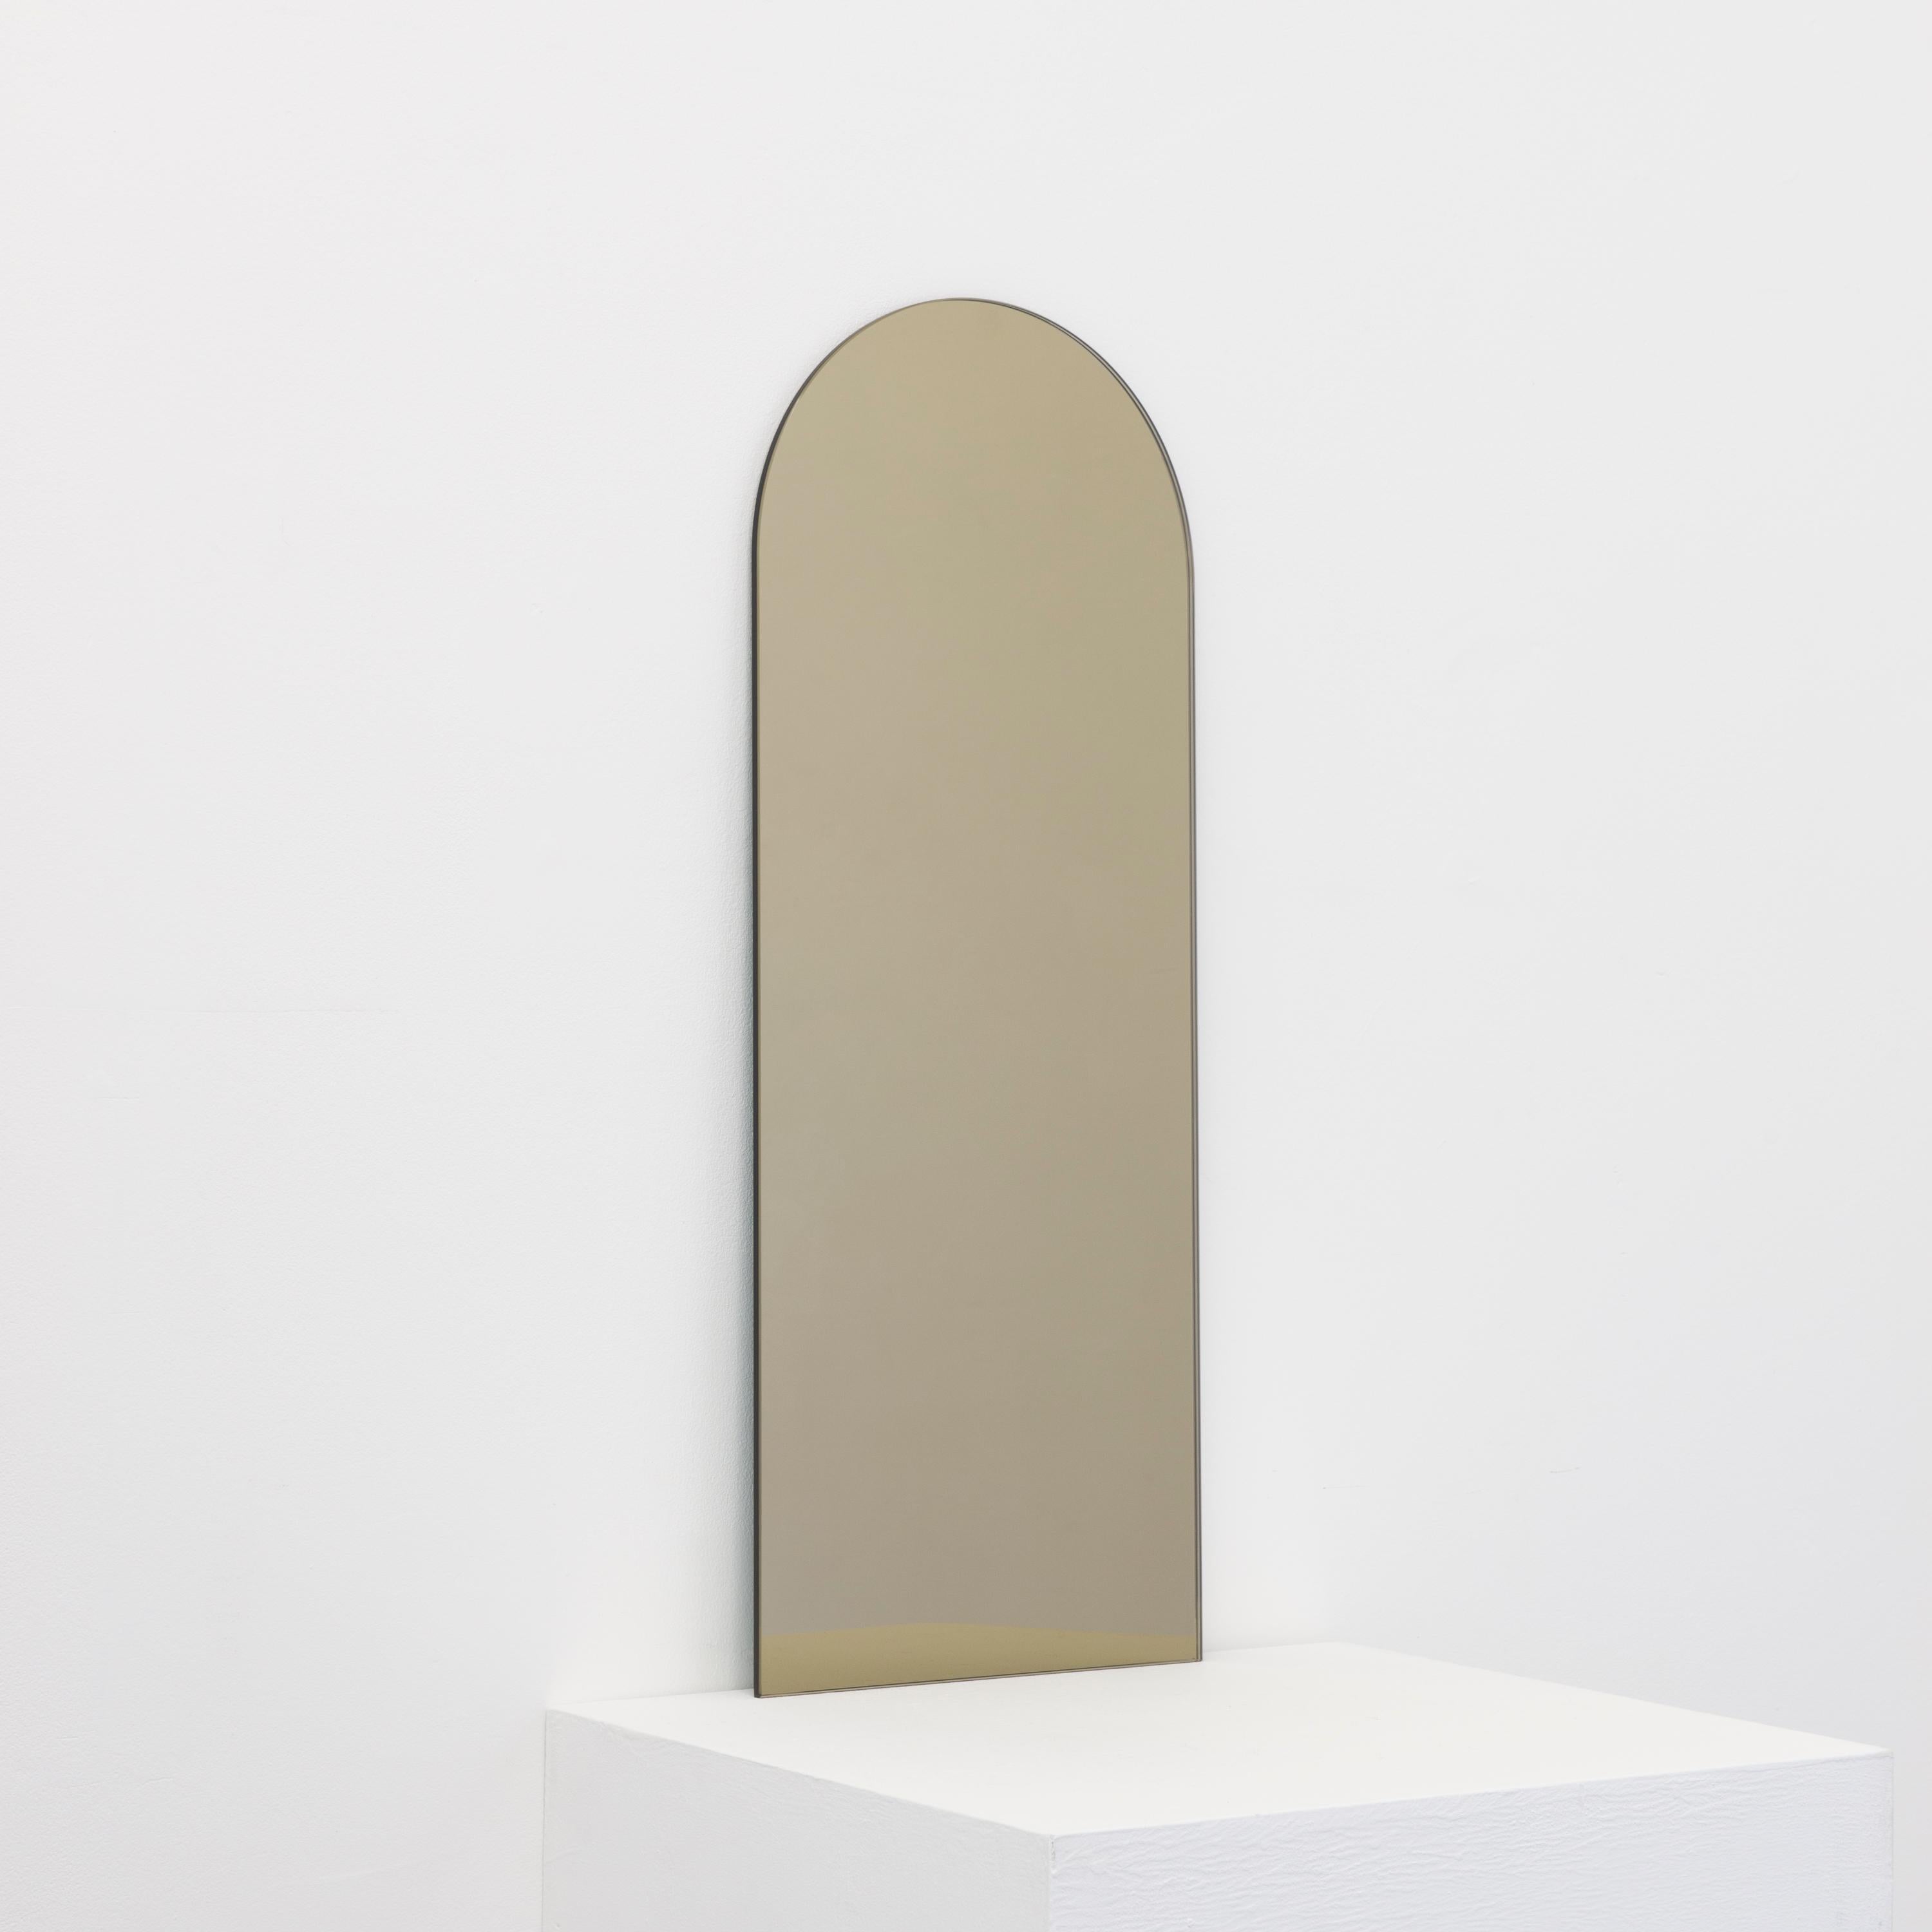 Minimalist arch shaped frameless bronze tinted mirror with a floating effect. Quality design that ensures the mirror sits perfectly parallel to the wall. Designed and made in London, UK.

Fitted with professional plates not visible once installed